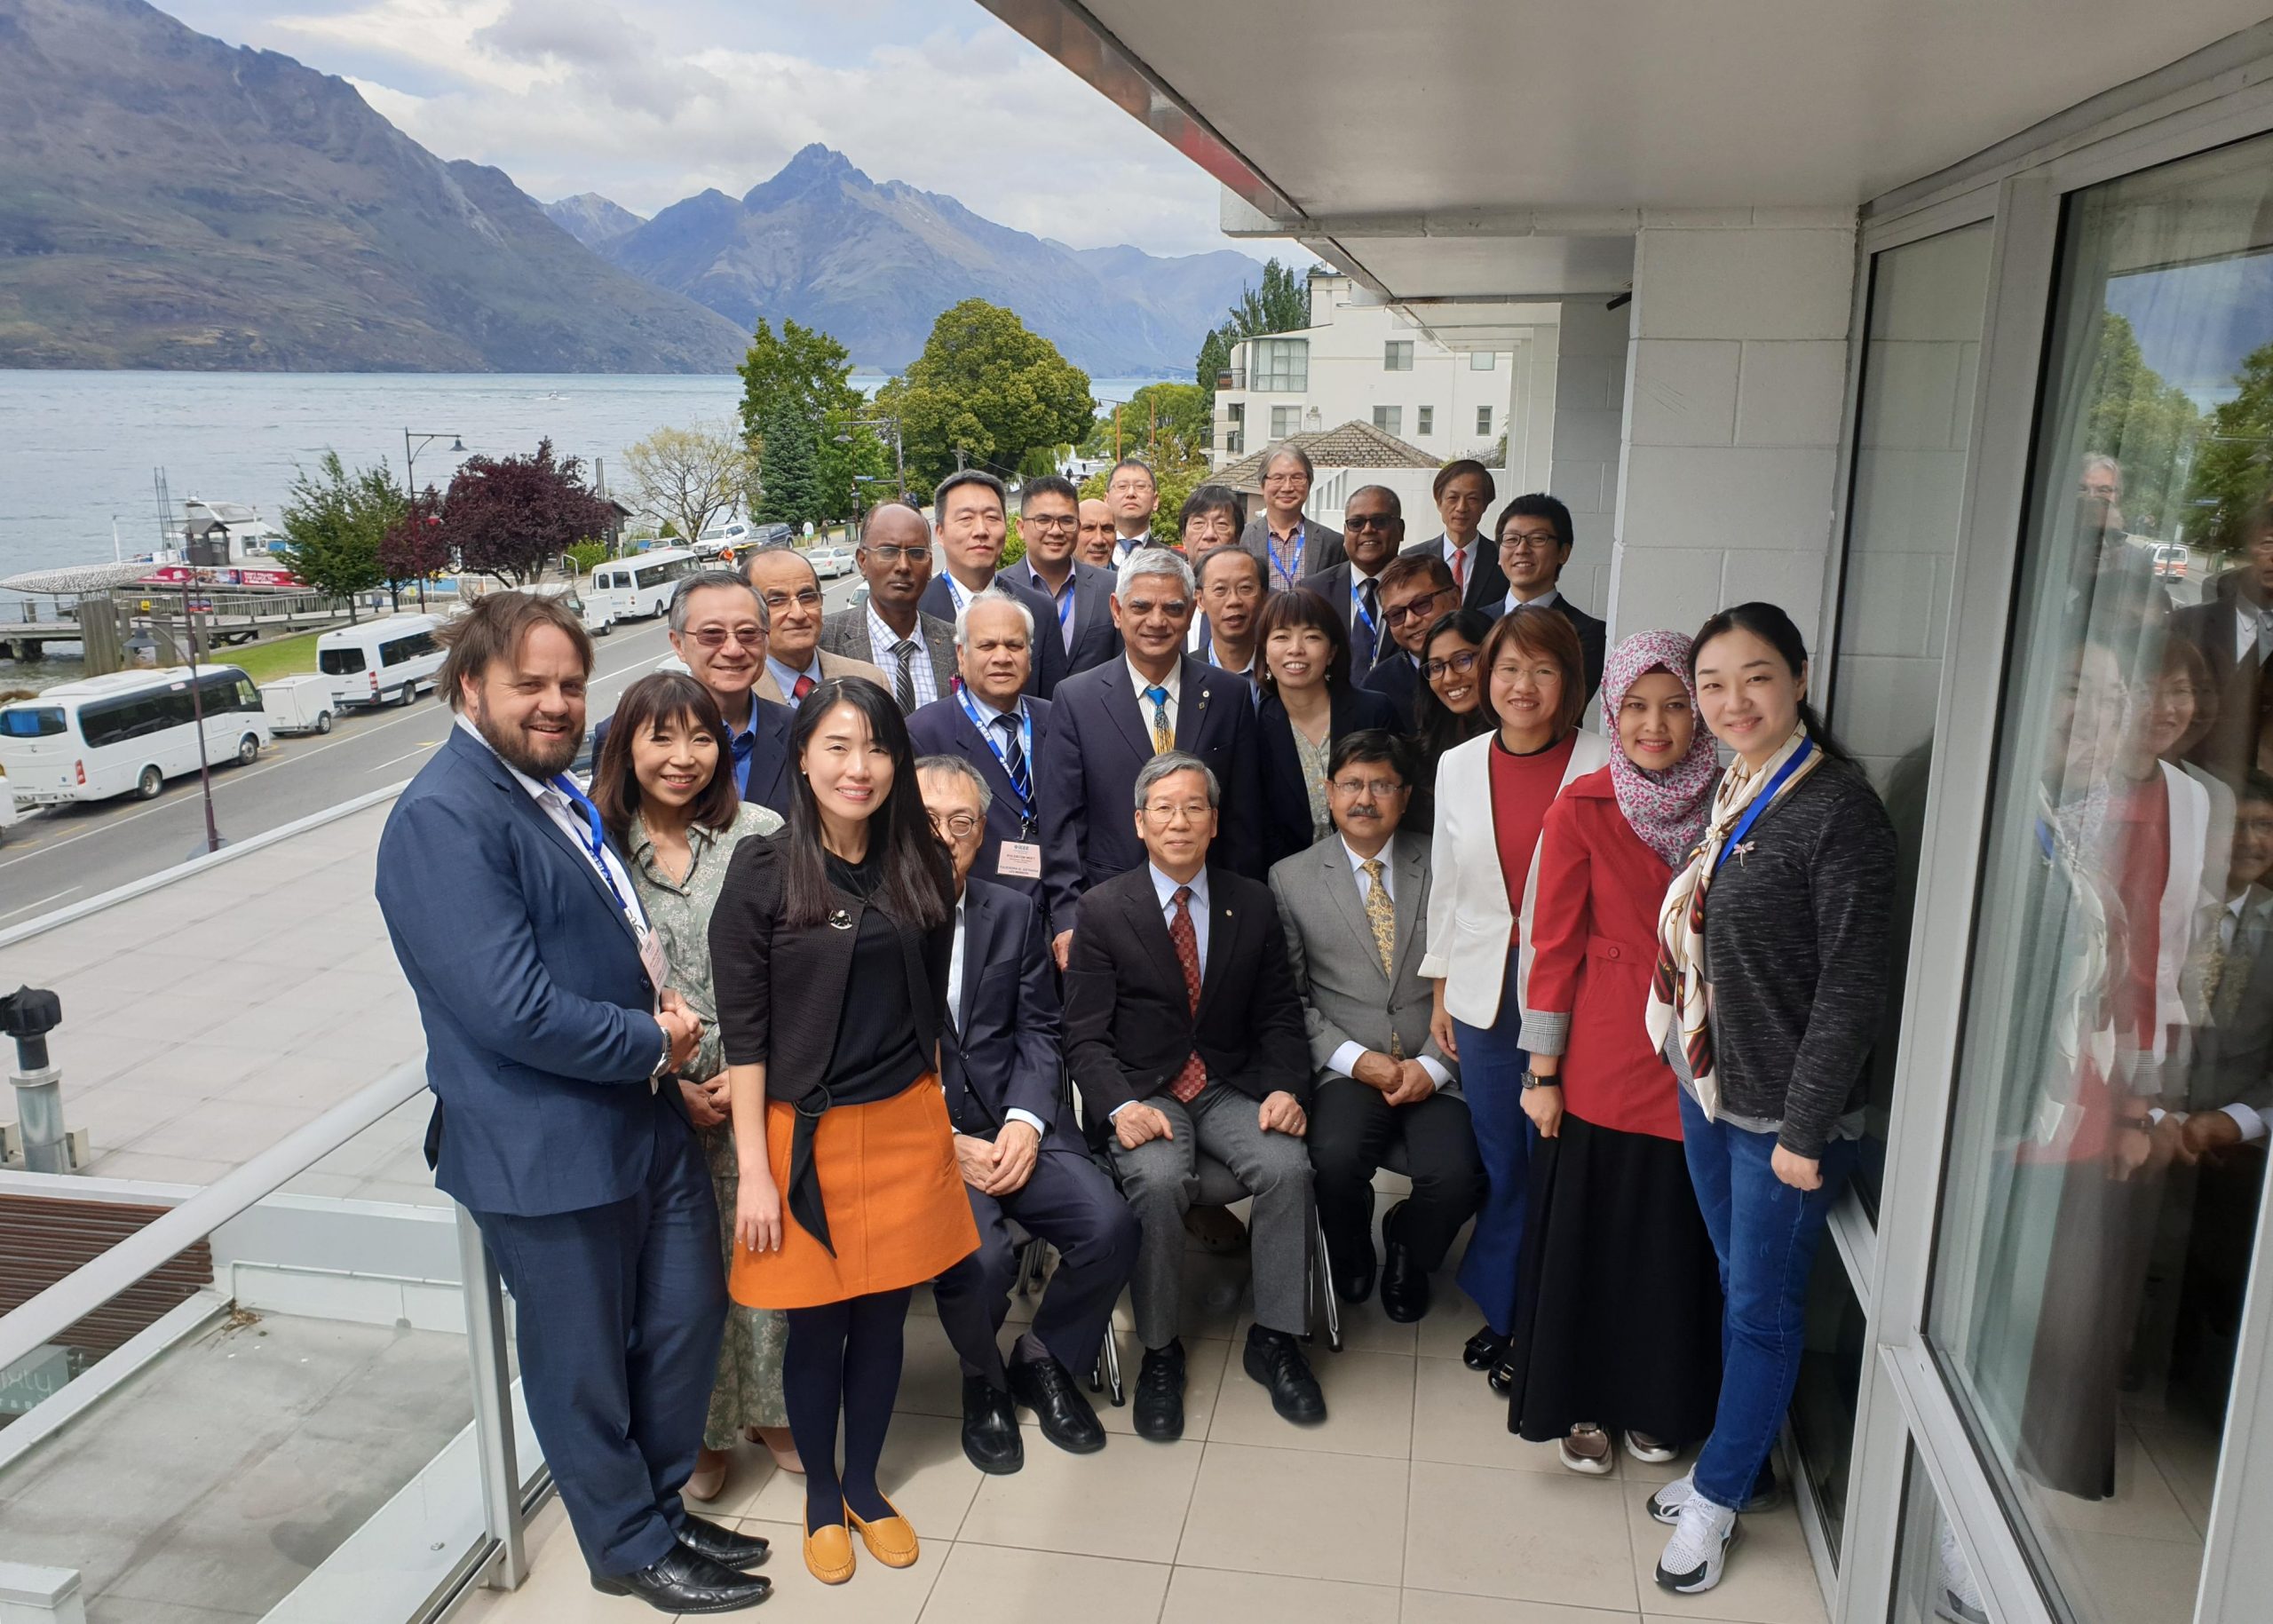 Attendees with Lake Wakatipu in the back